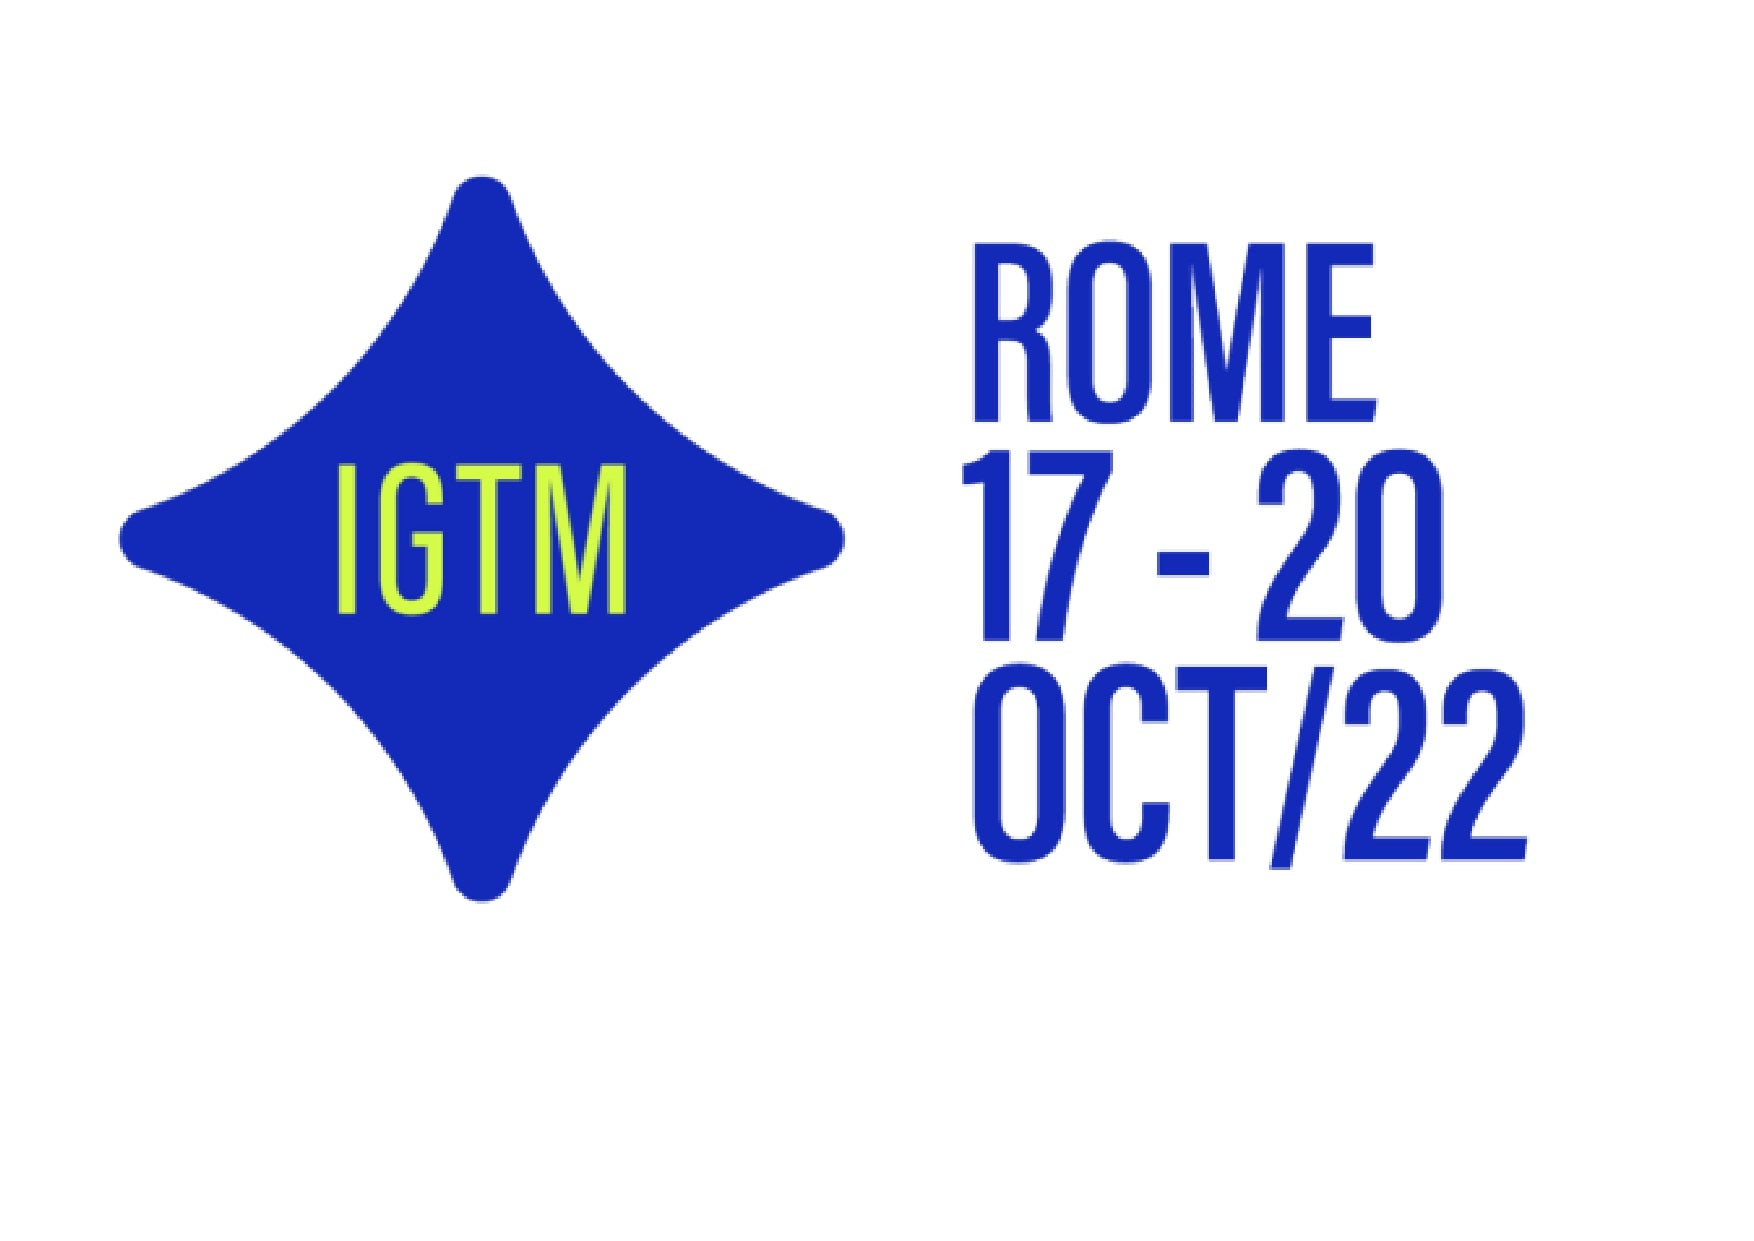 We'll be exhibiting at the IGTM2022.  https://www.igtmarket.com/en-gb/about.html